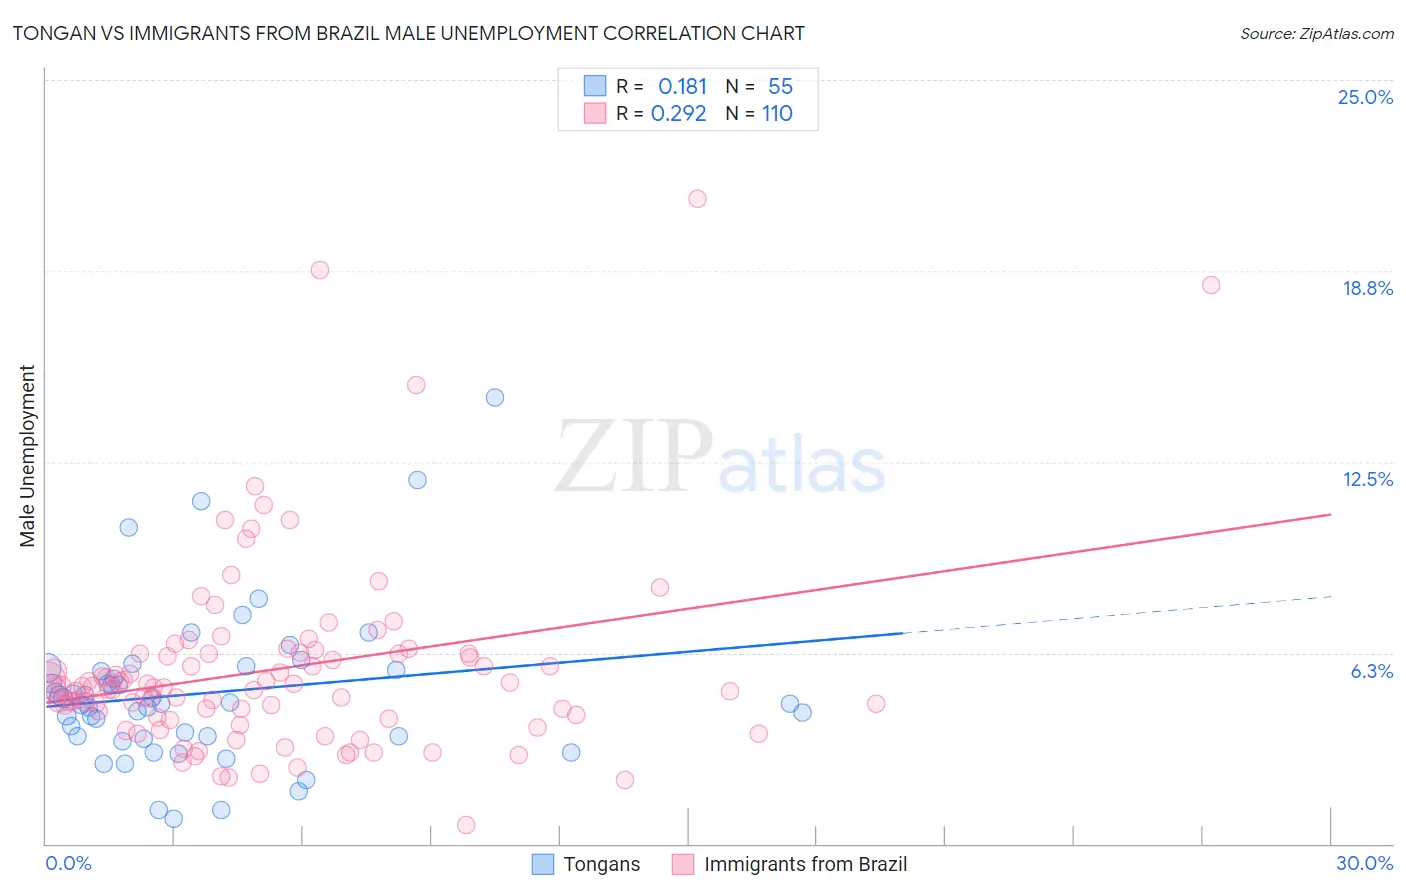 Tongan vs Immigrants from Brazil Male Unemployment